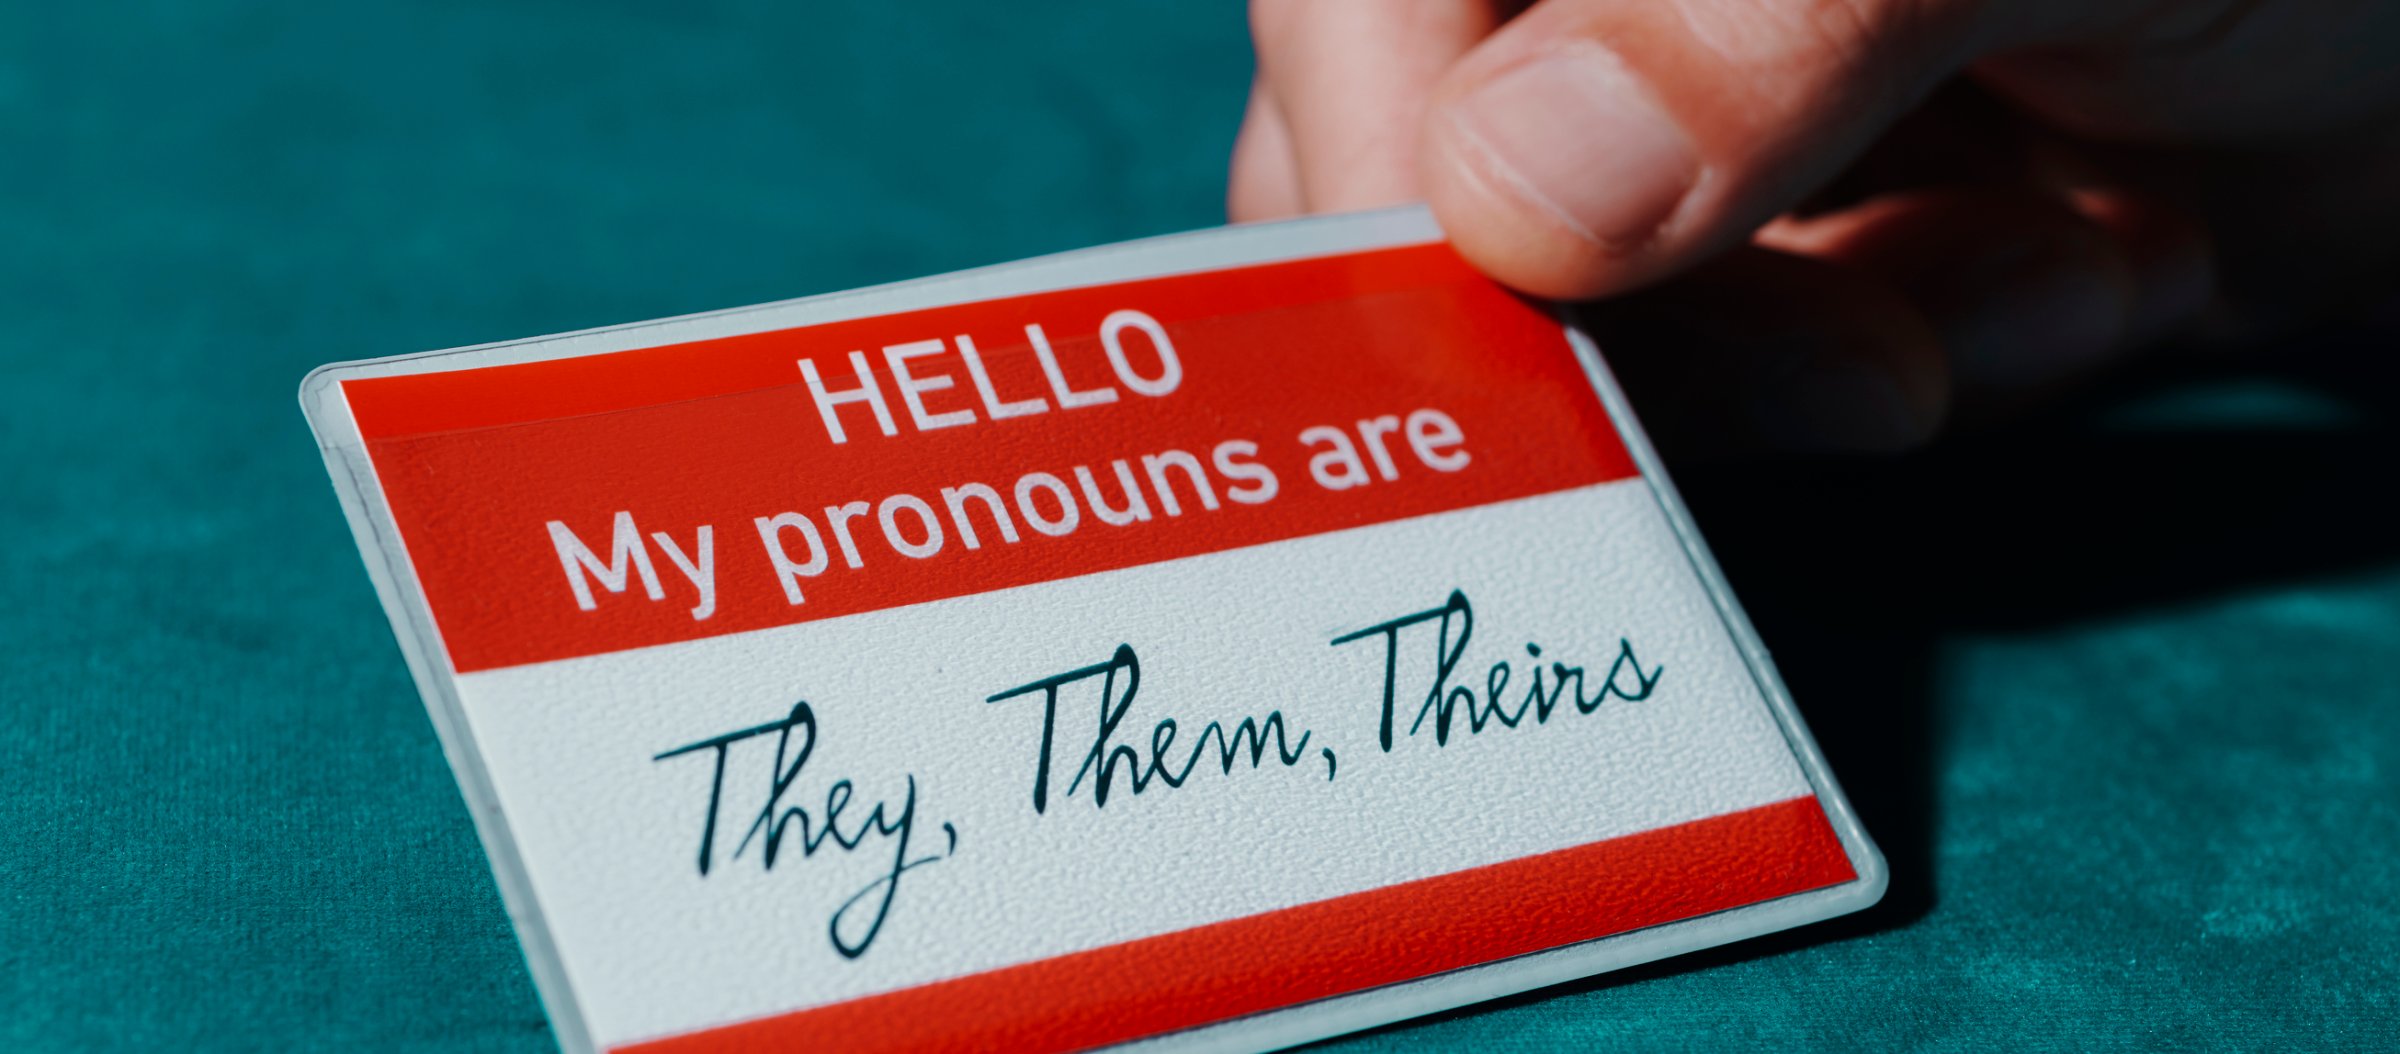 my pronouns are they, them web banner